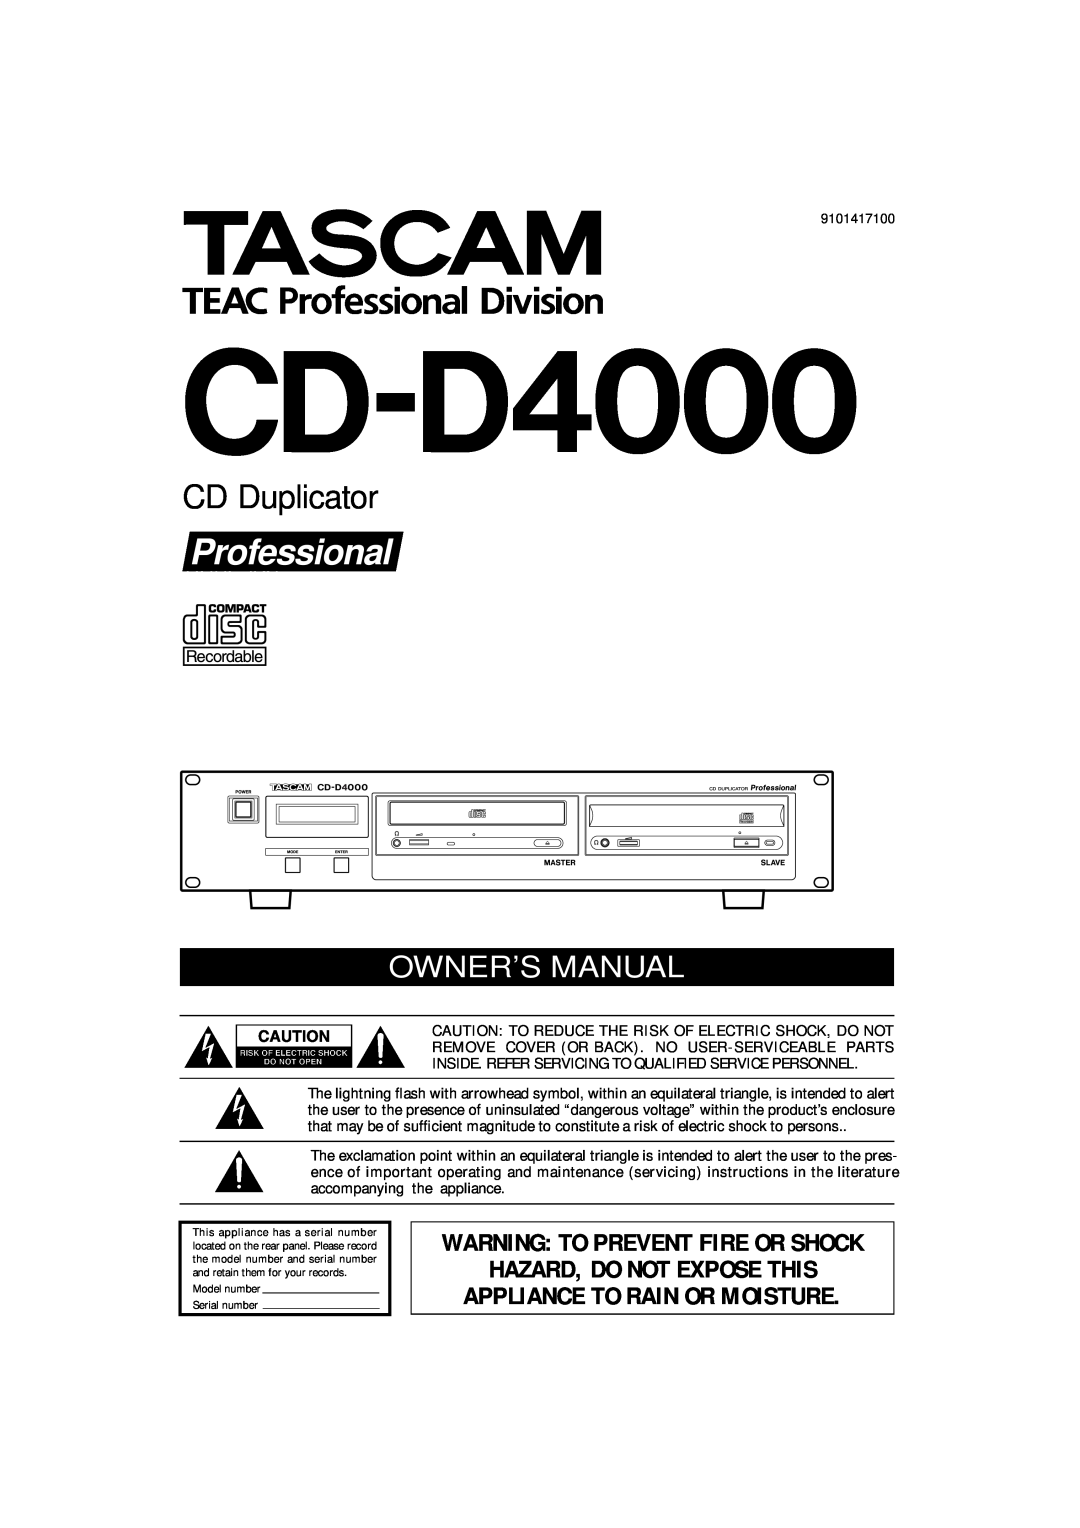 Tascam CD-D4000 owner manual Professional, CD Duplicator, Warning To Prevent Fire Or Shock, Hazard, Do Not Expose This 